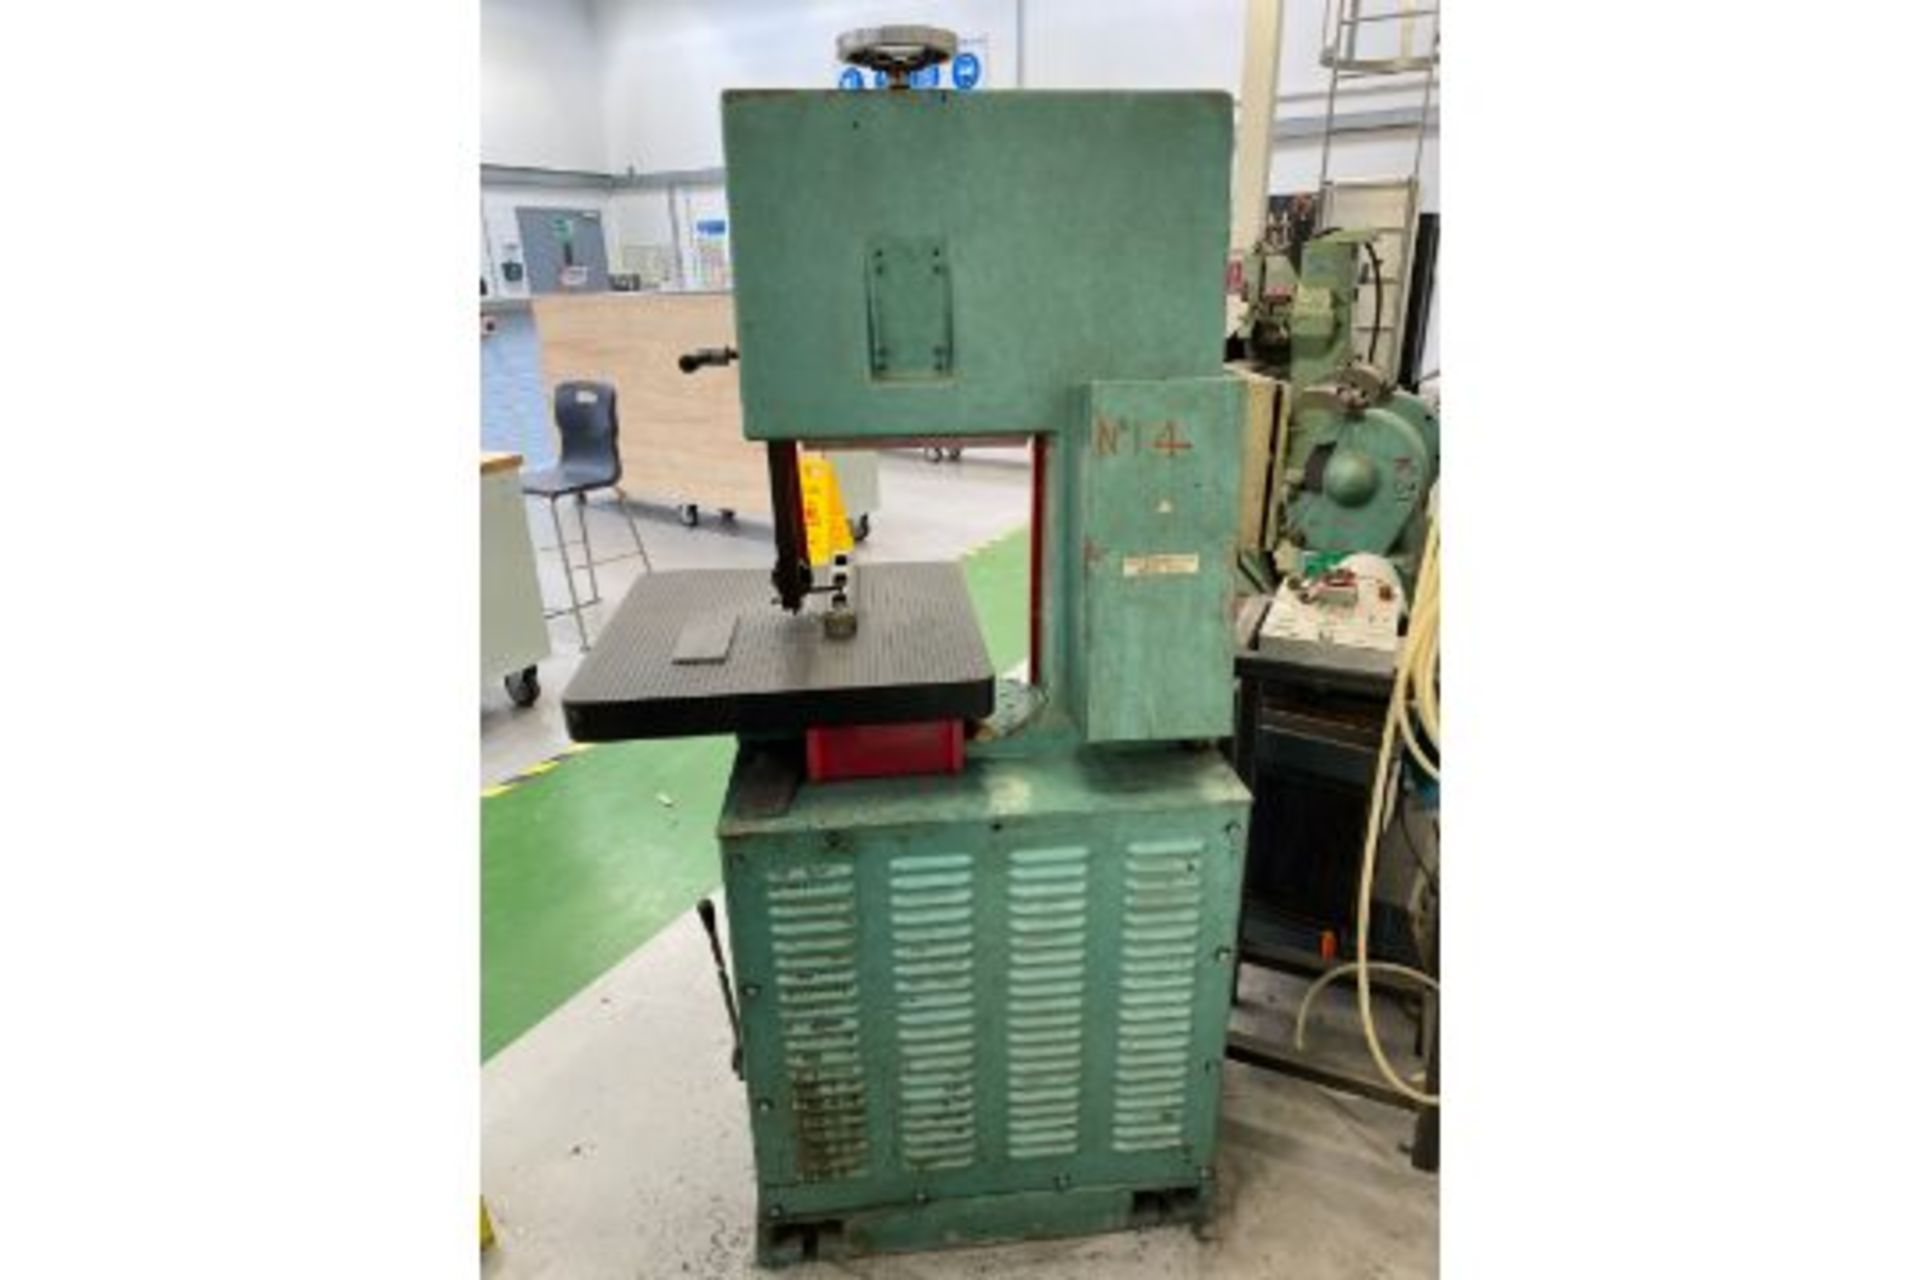 Addison Jubilee VBS 400 Vertical Variable Speed Bandsaw with Stationary Table - Image 5 of 10